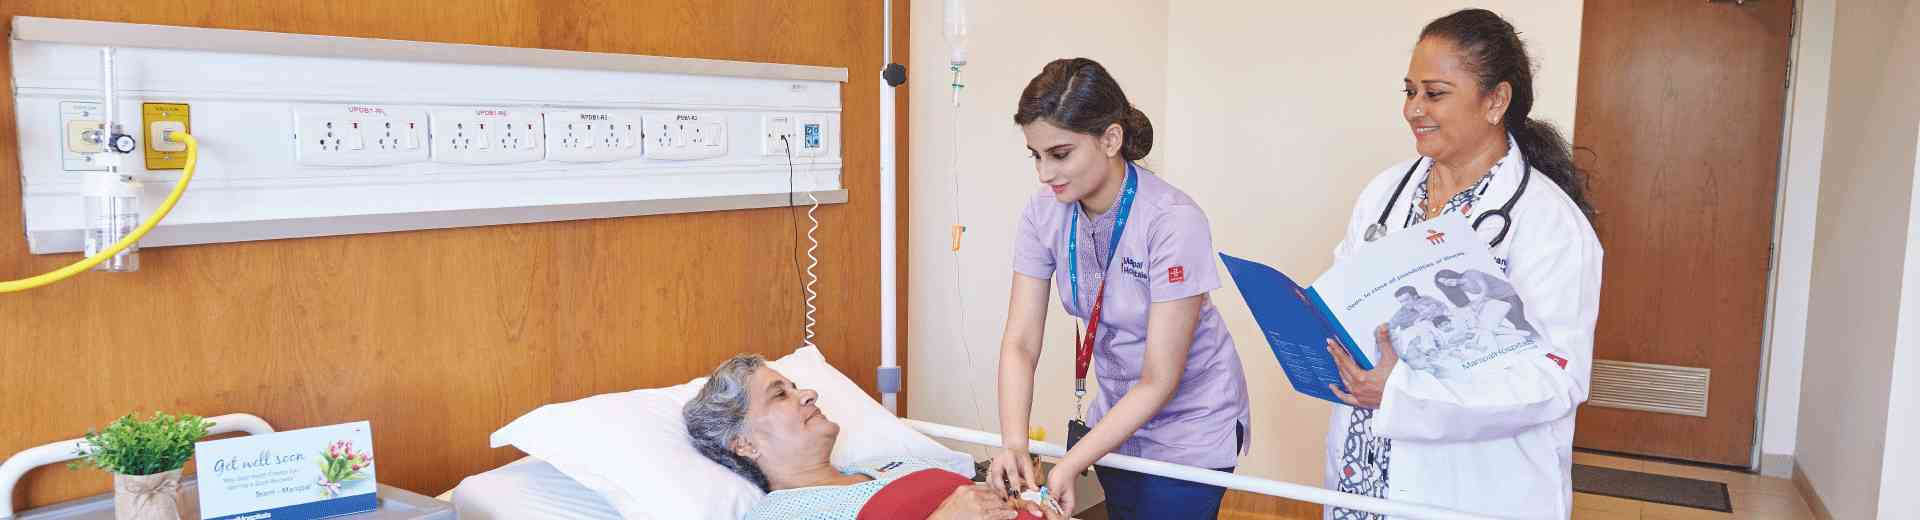 Outpatient Inpatient and Emergency services in Yeshwanthpur